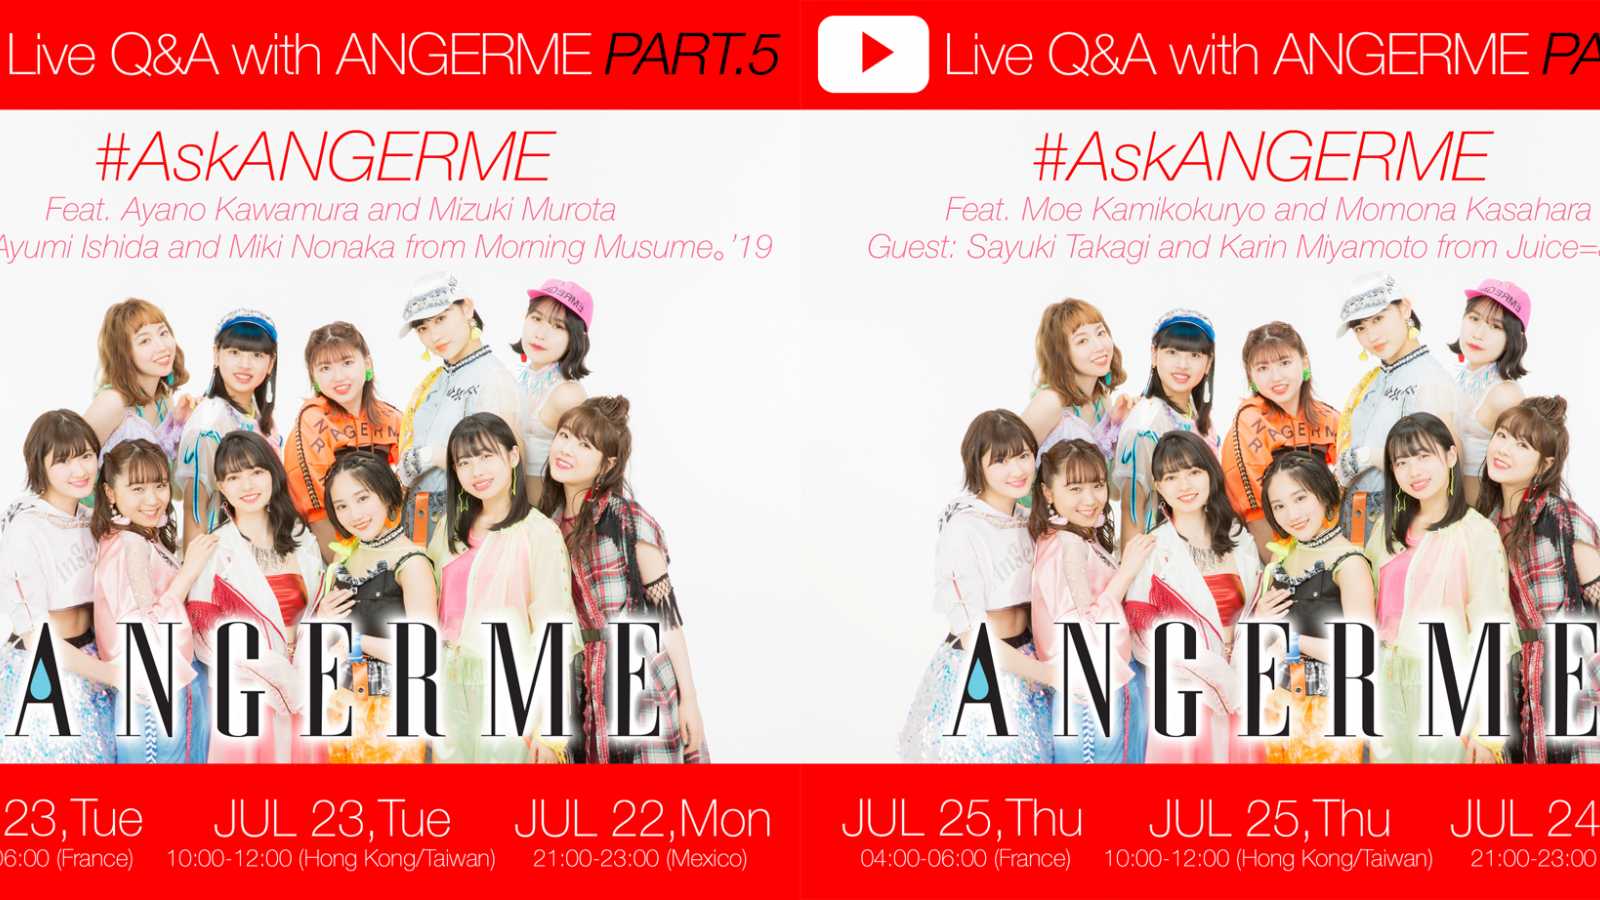 ANGERME to Hold Joint Live Q&As with Morning Musume。’19 and Juice=Juice Members © DC FACTORY. All rights reserved.